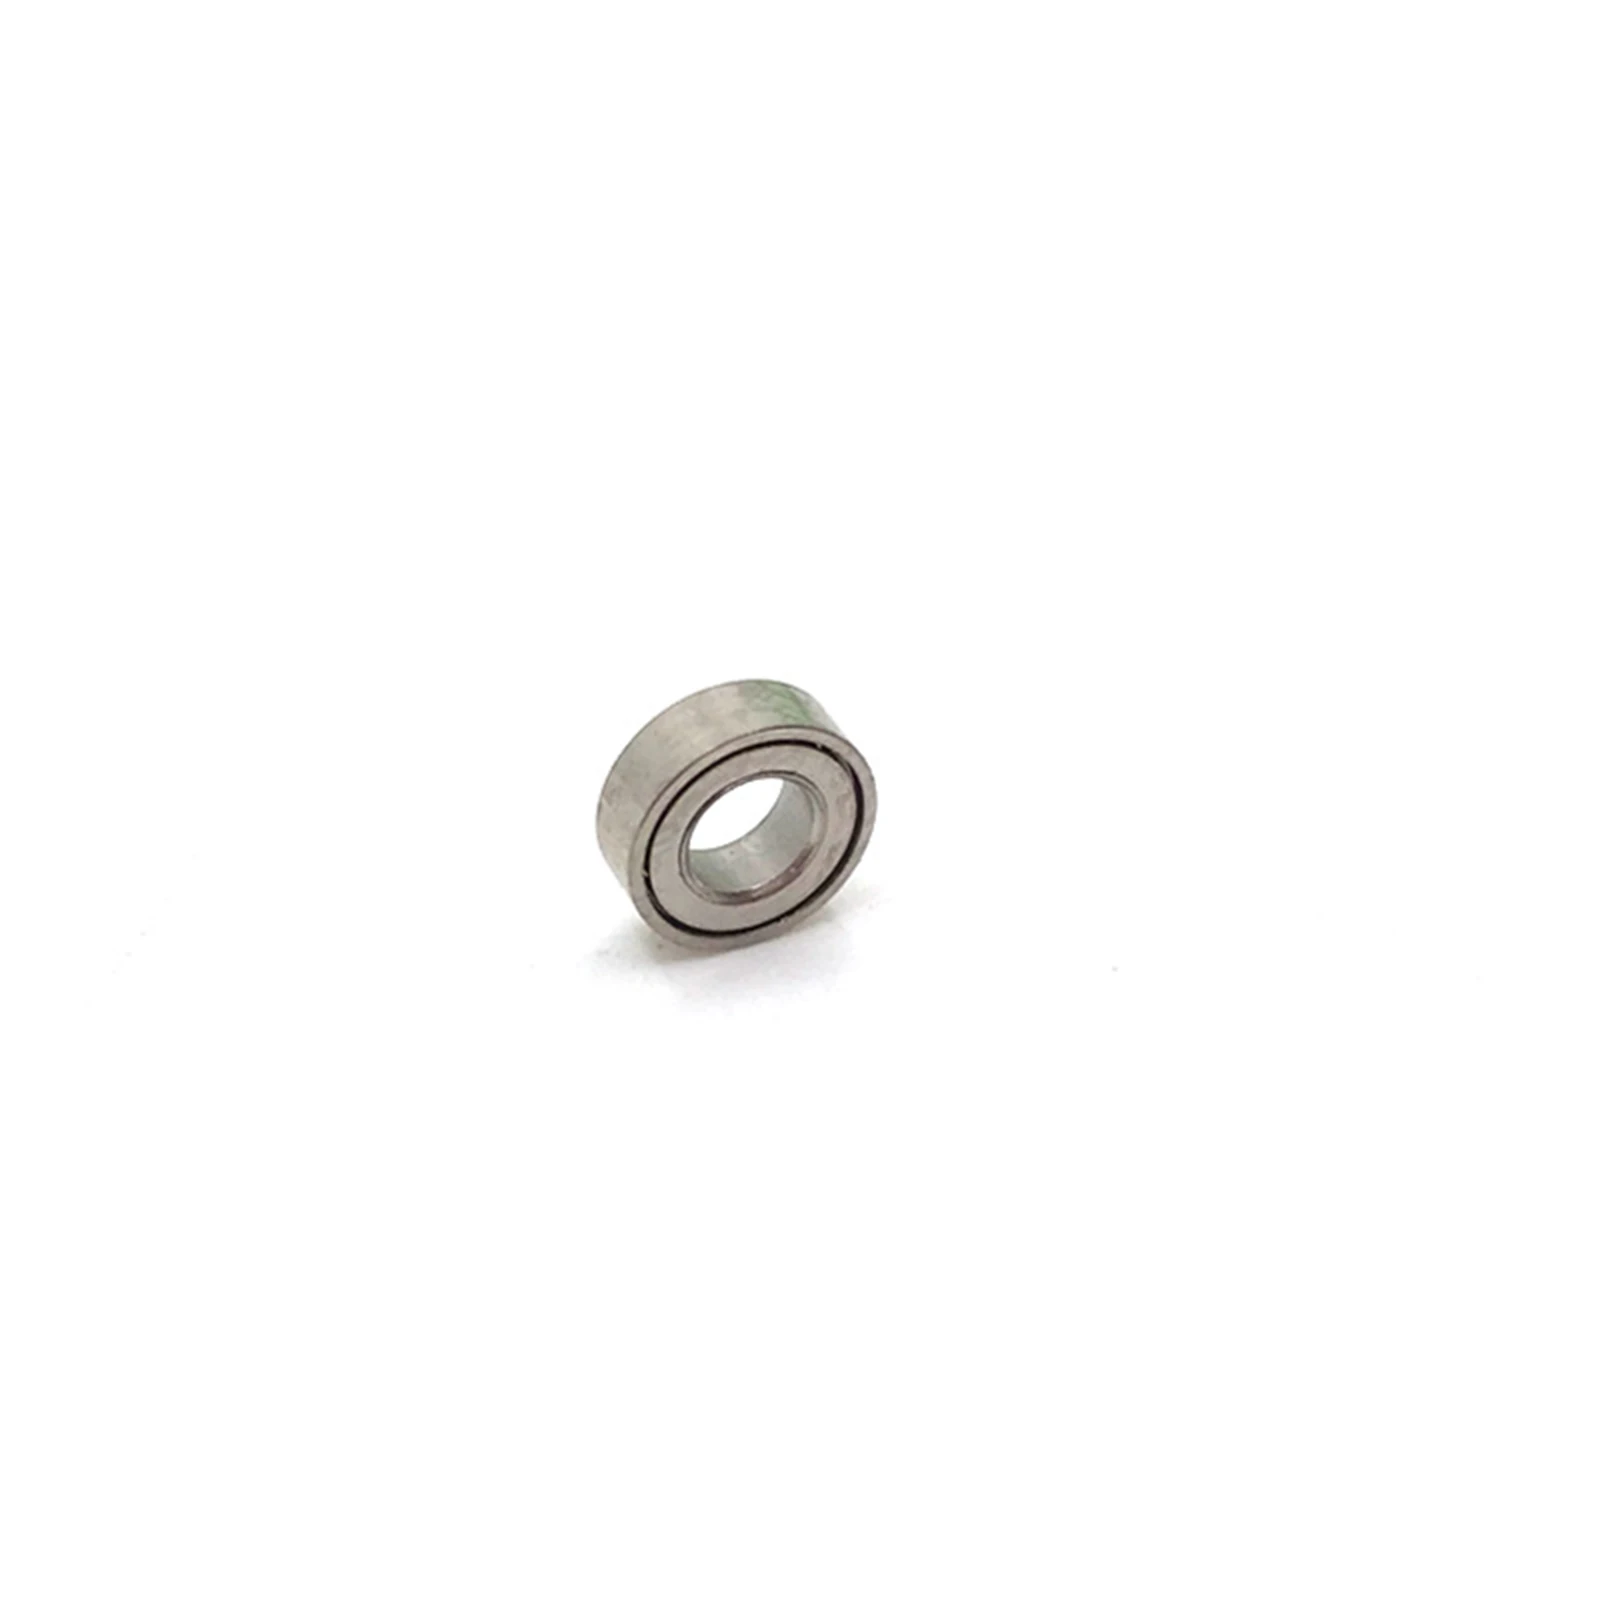 10x Metal 3x6x2mm Bearing Spare Accessories for WPL D12 C14 C34 C44 Part